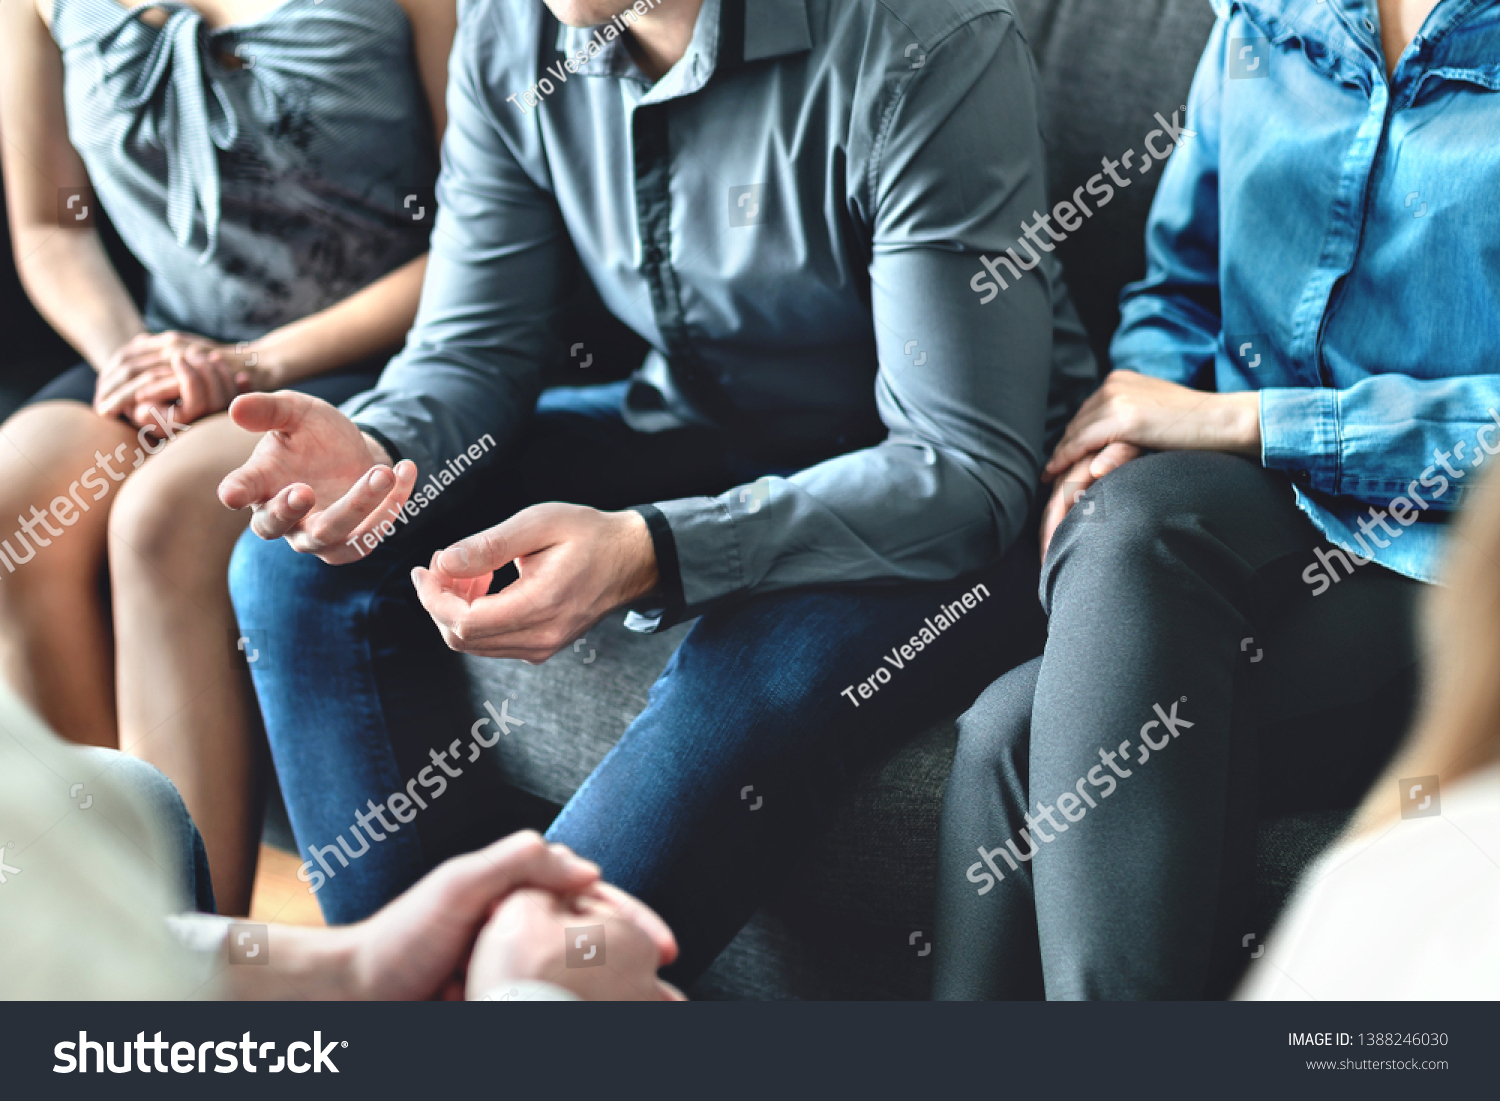 Counseling and conversation in group therapy or meeting. Man sharing story to community. Casual business people in discussion. Peer support, trust and empathy. Treatment together in help center. #1388246030